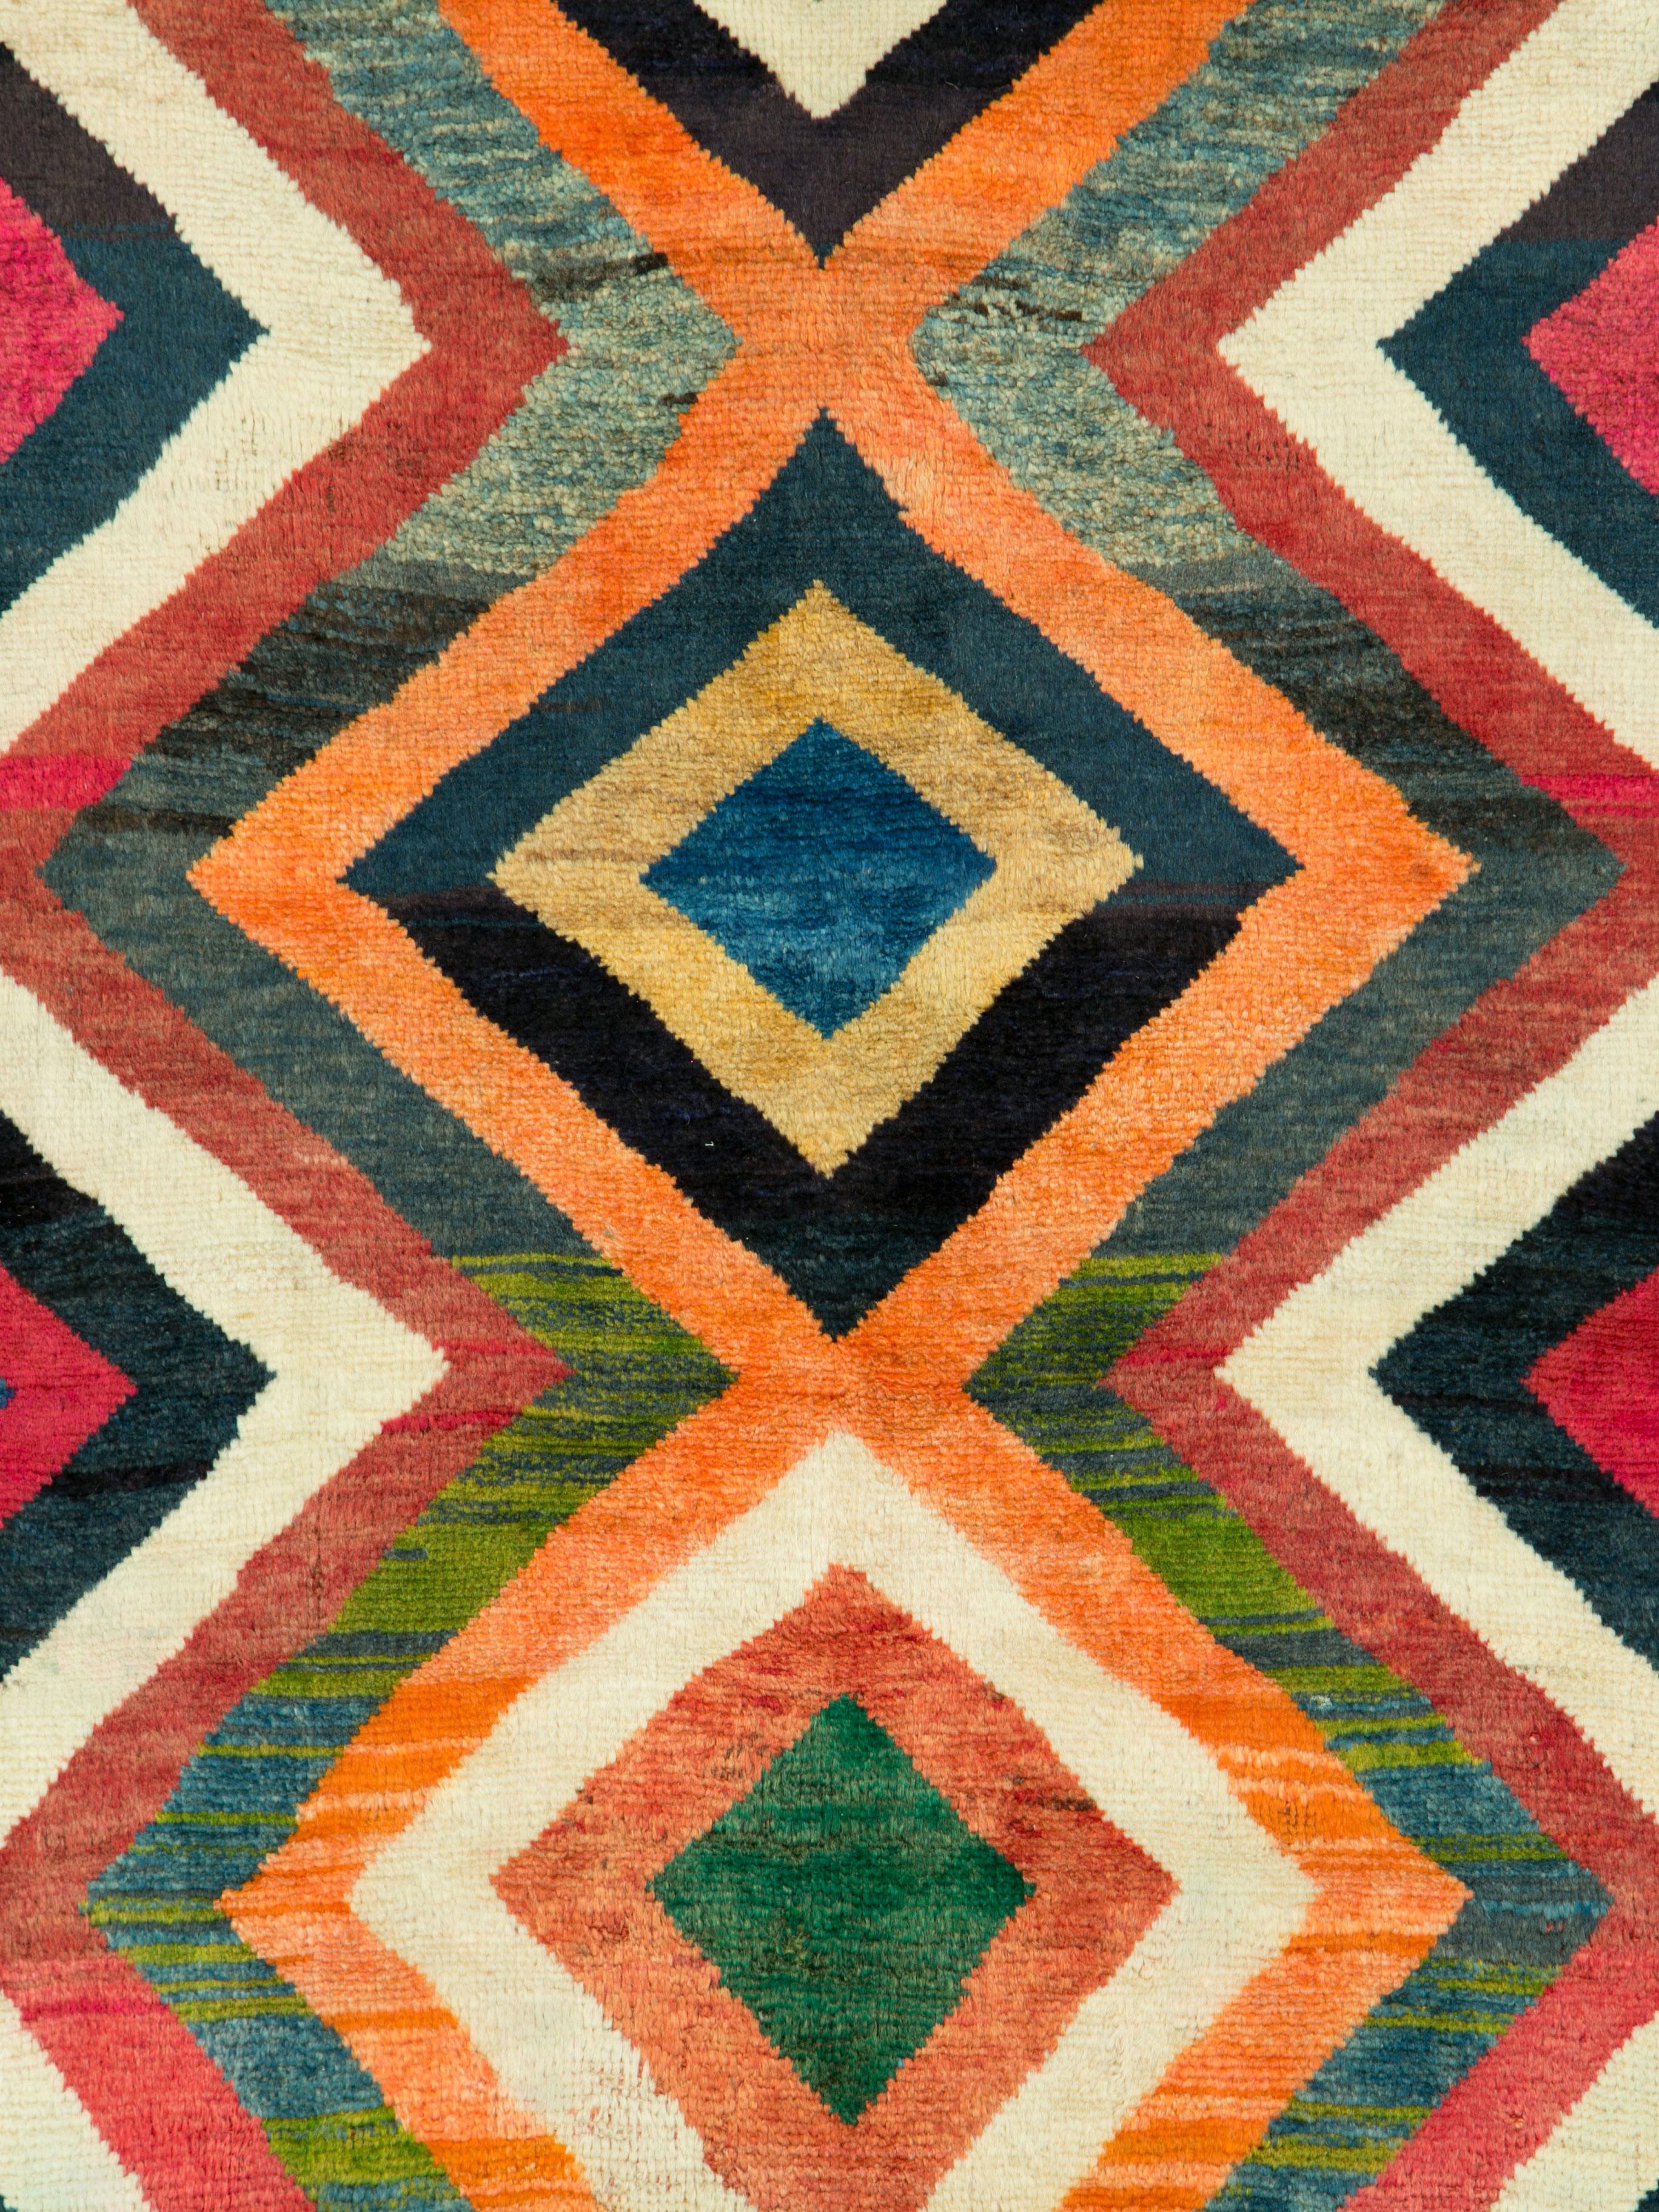 A vintage Persian Gabbeh rug from the mid-20th century.